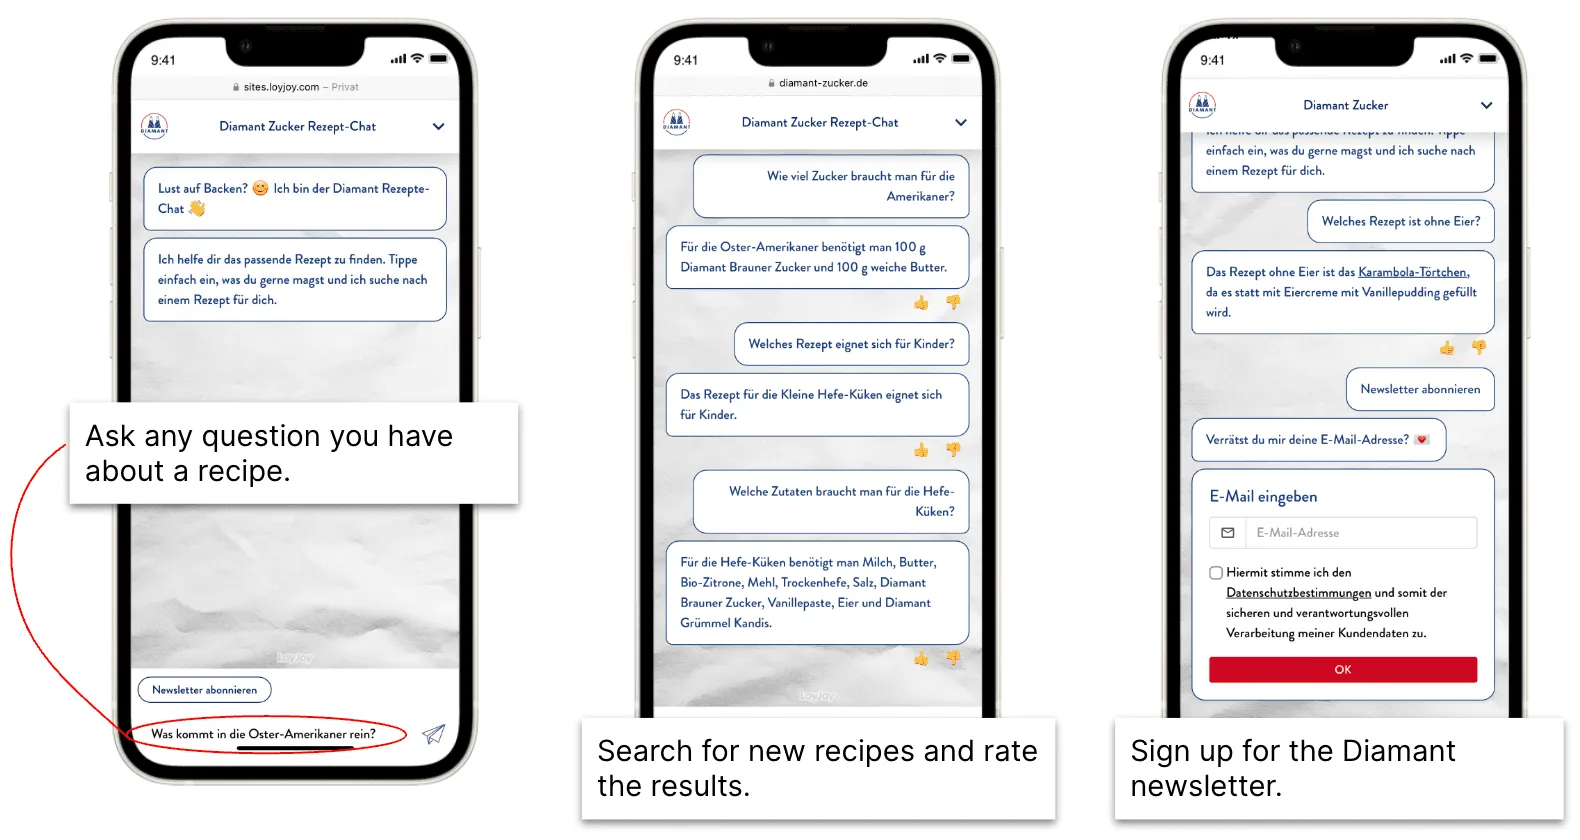 Three phones with an opened Chatbot are displayed. All of them show the Diamant Zucker chatbot, that was created using the LoyJoy Platform. Users can find baking recipes by simply asking questions about a recipe.